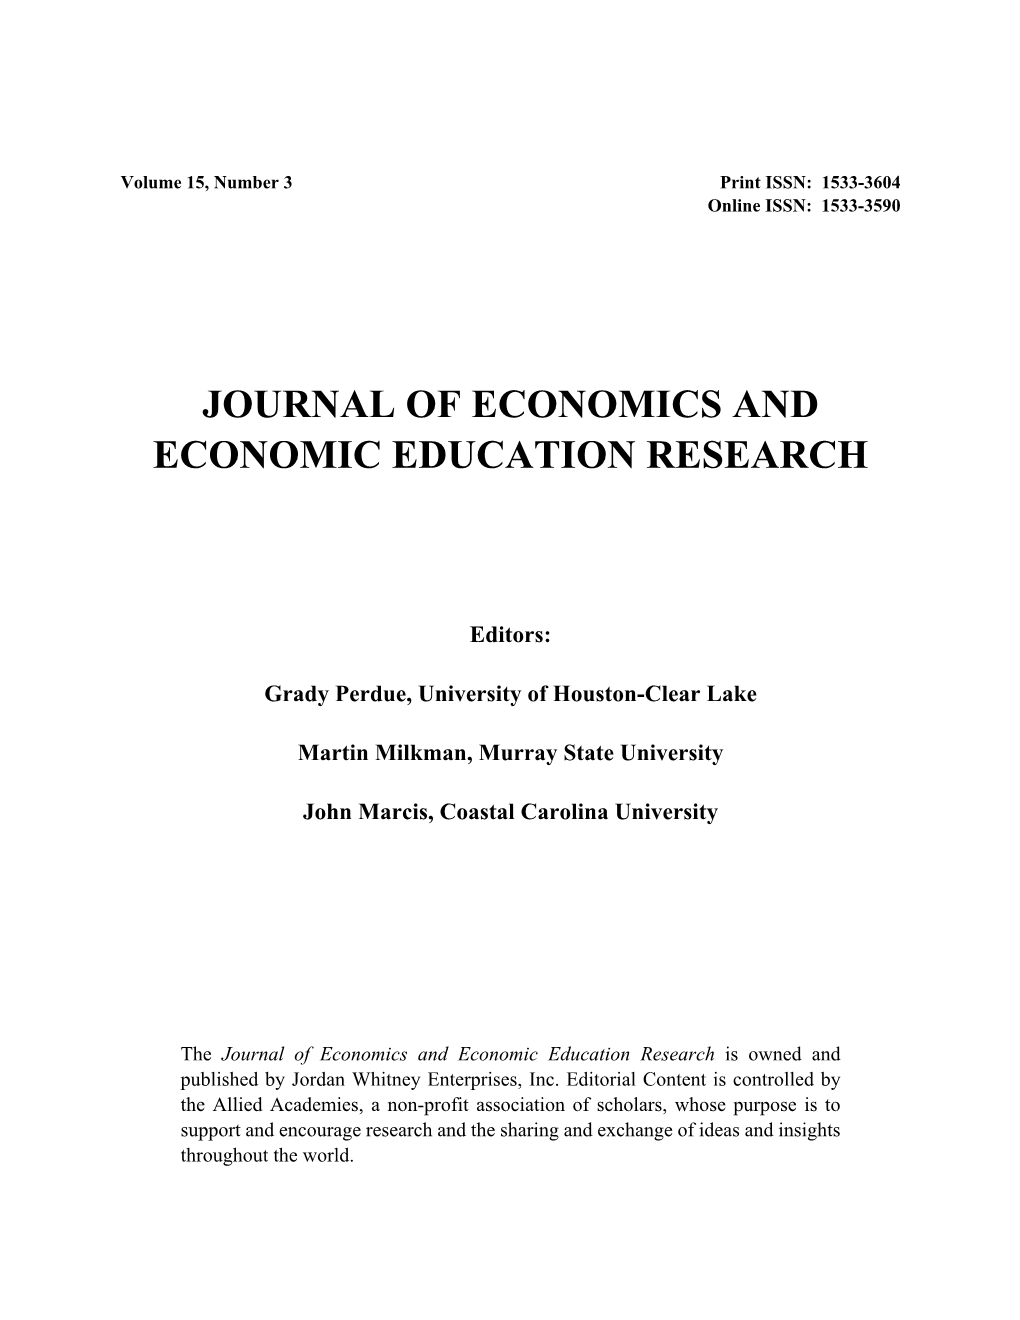 Journal of Economics and Economic Education Research